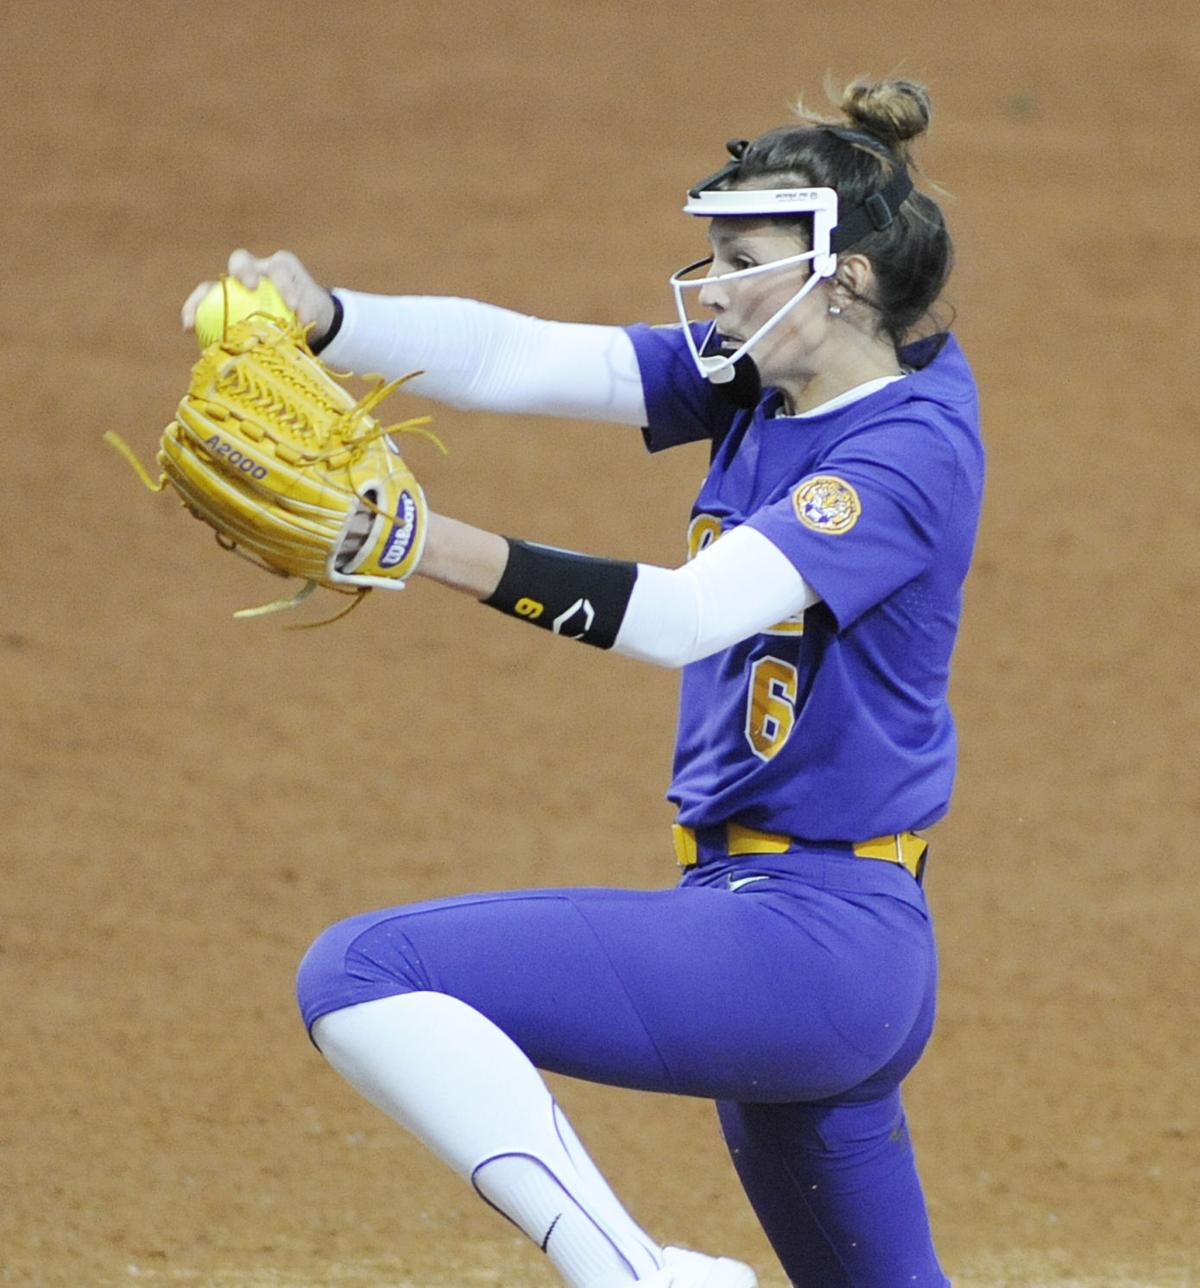 LSU softball pitcher Maribeth Gorsuch making most of extended NCAA